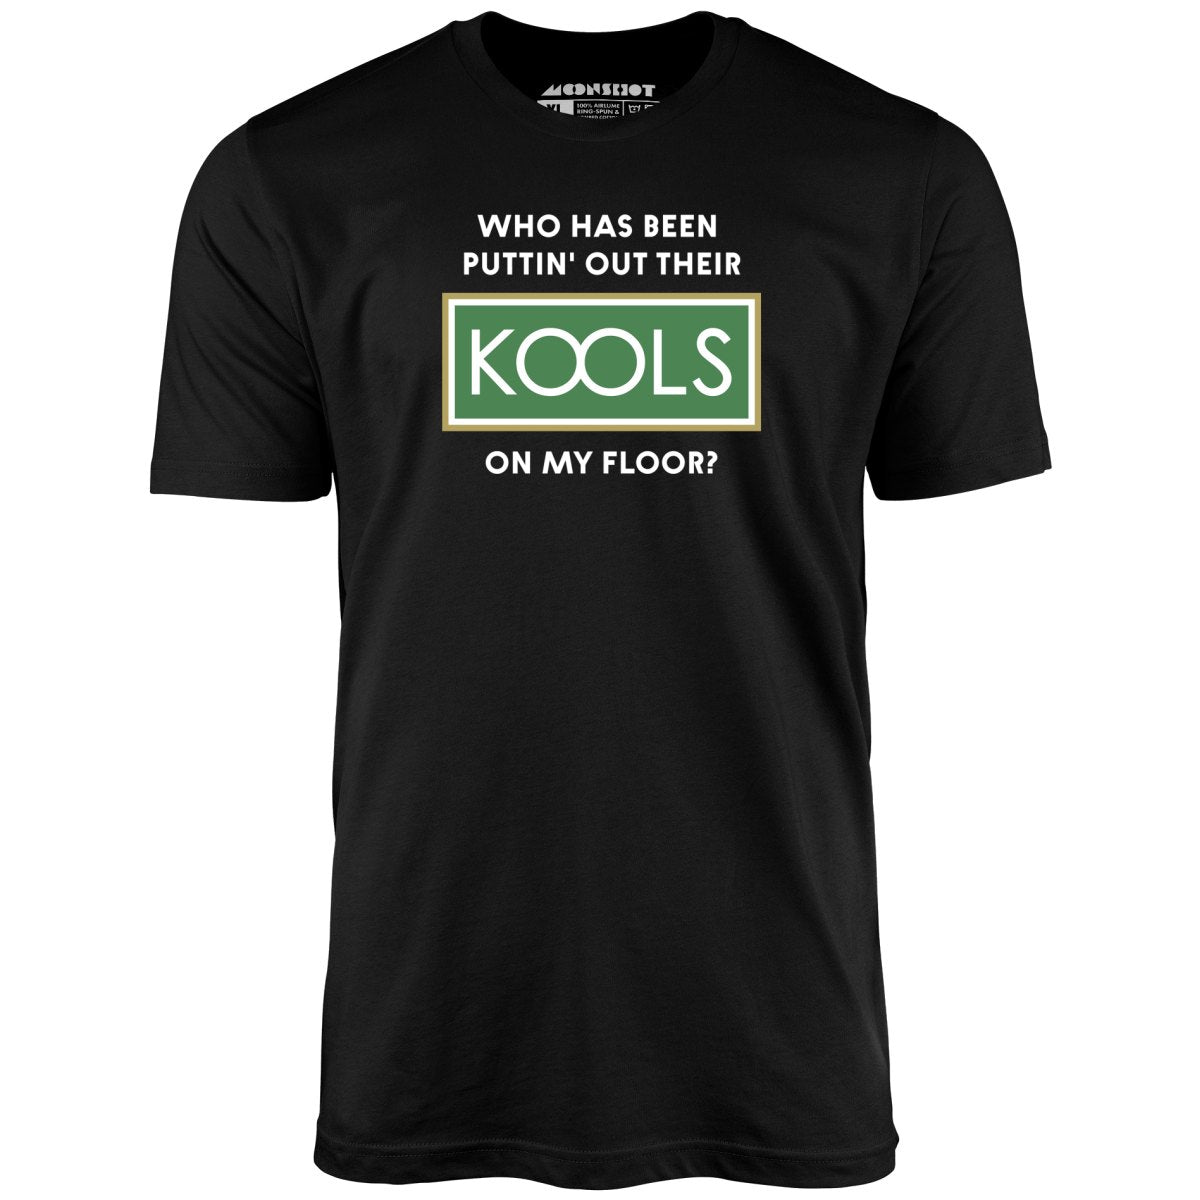 Who Has Been Puttin' Out Their Kools On My Floor? - Unisex T-Shirt